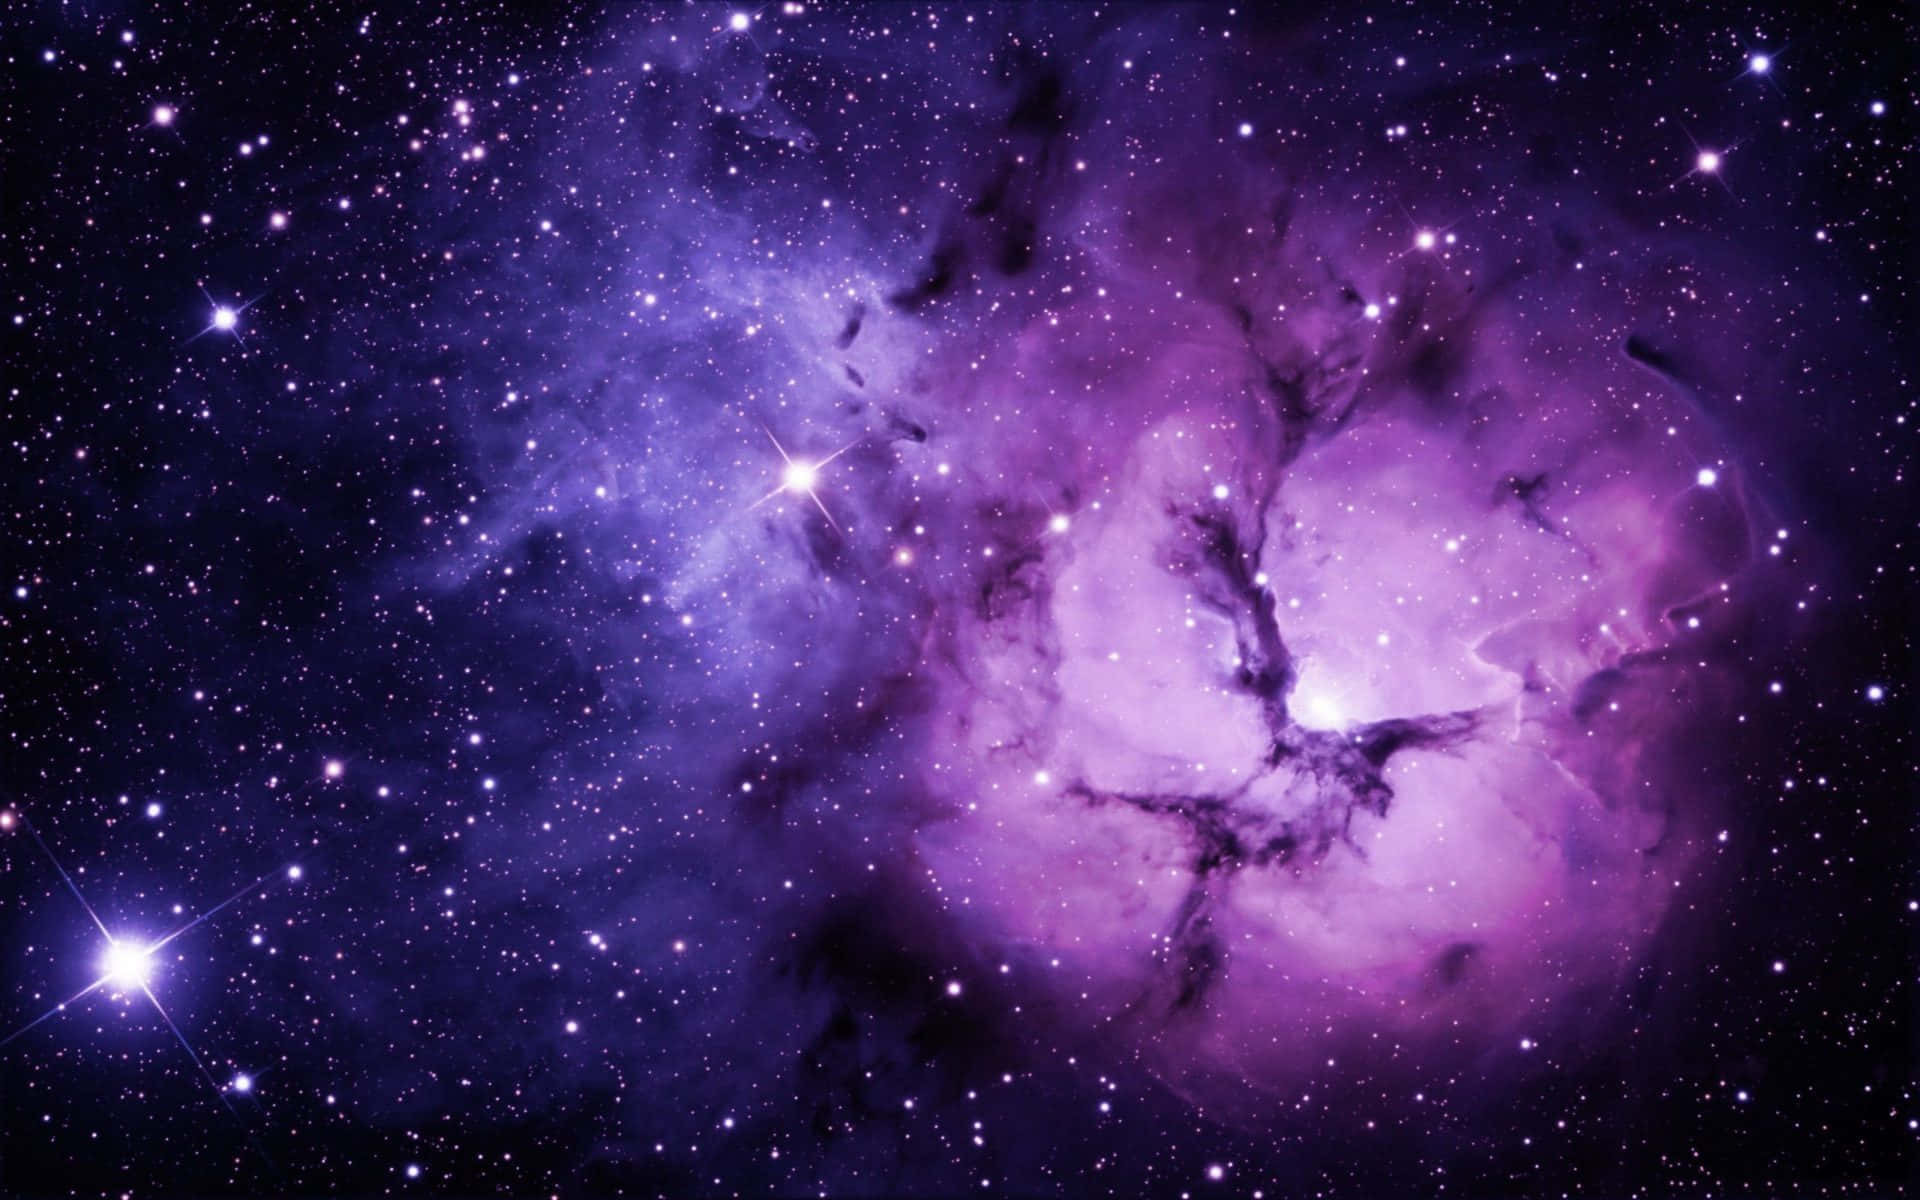 "Explore a breathtaking Purple Galaxy and all its beauty."